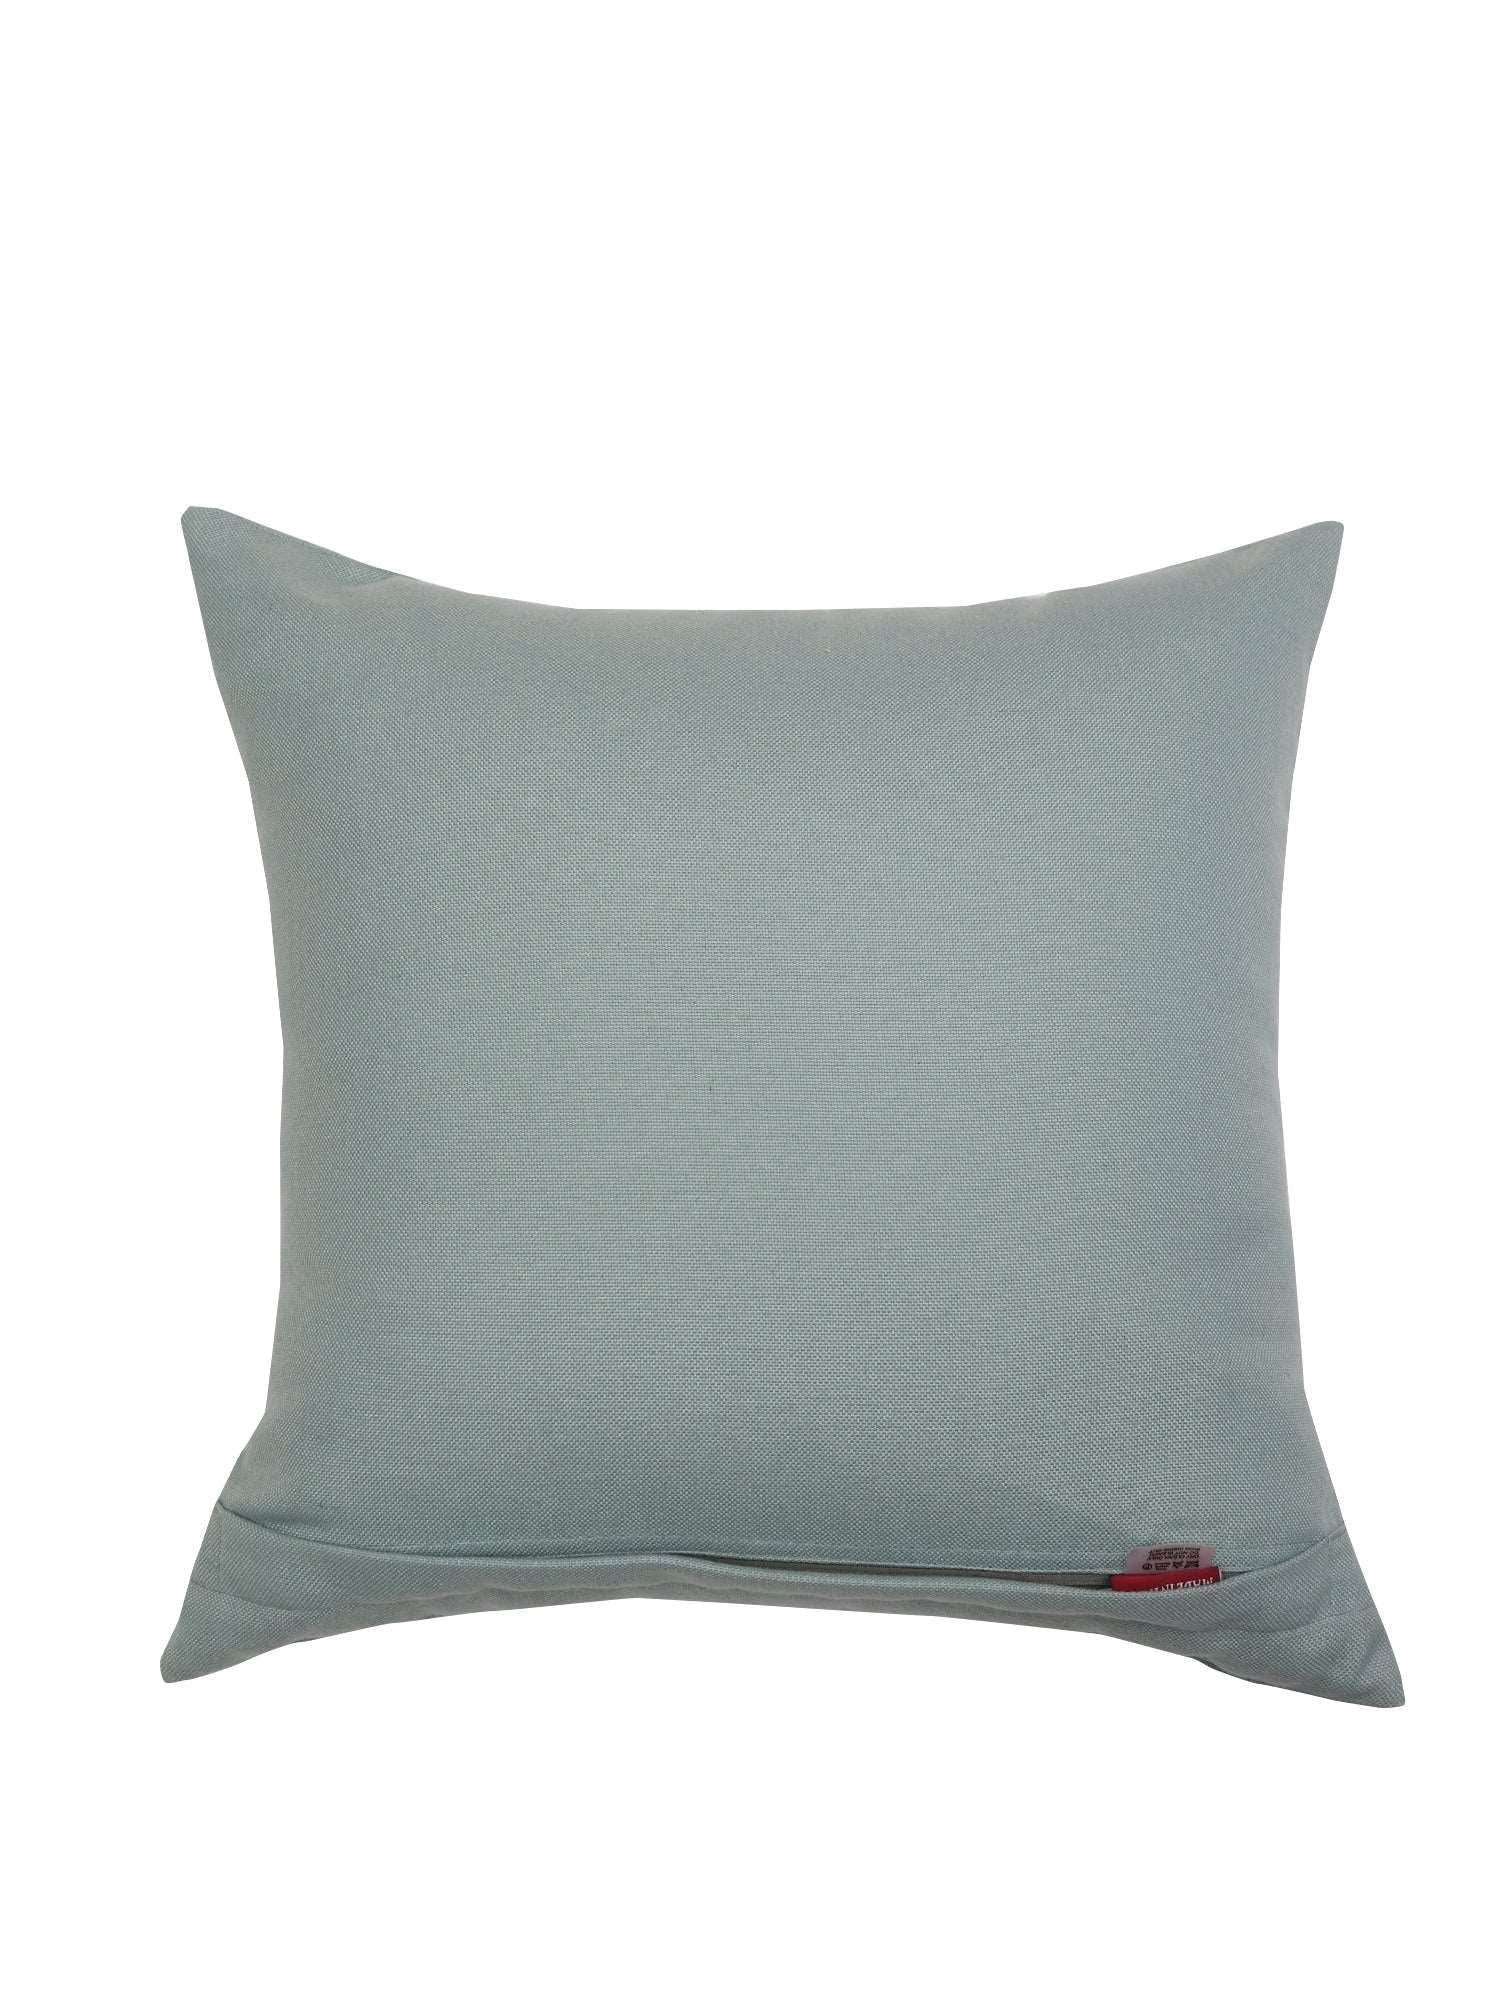 Cushion Cover Cotton Motif Hand Embroidered Teal - 16inches X 16inches